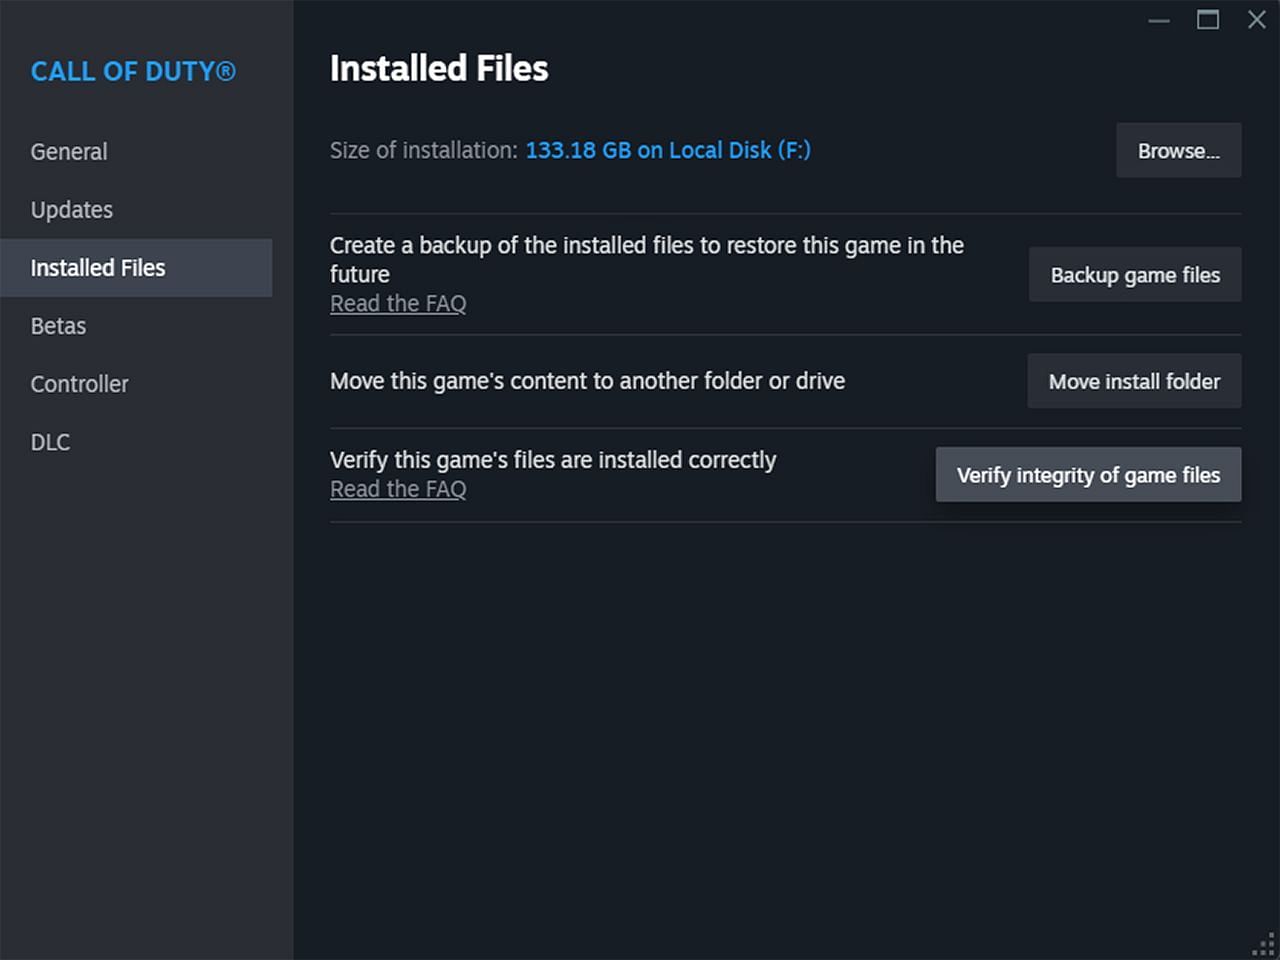 Verifying File Integrity on Steam for MW3 and Warzone (Image via Valve)